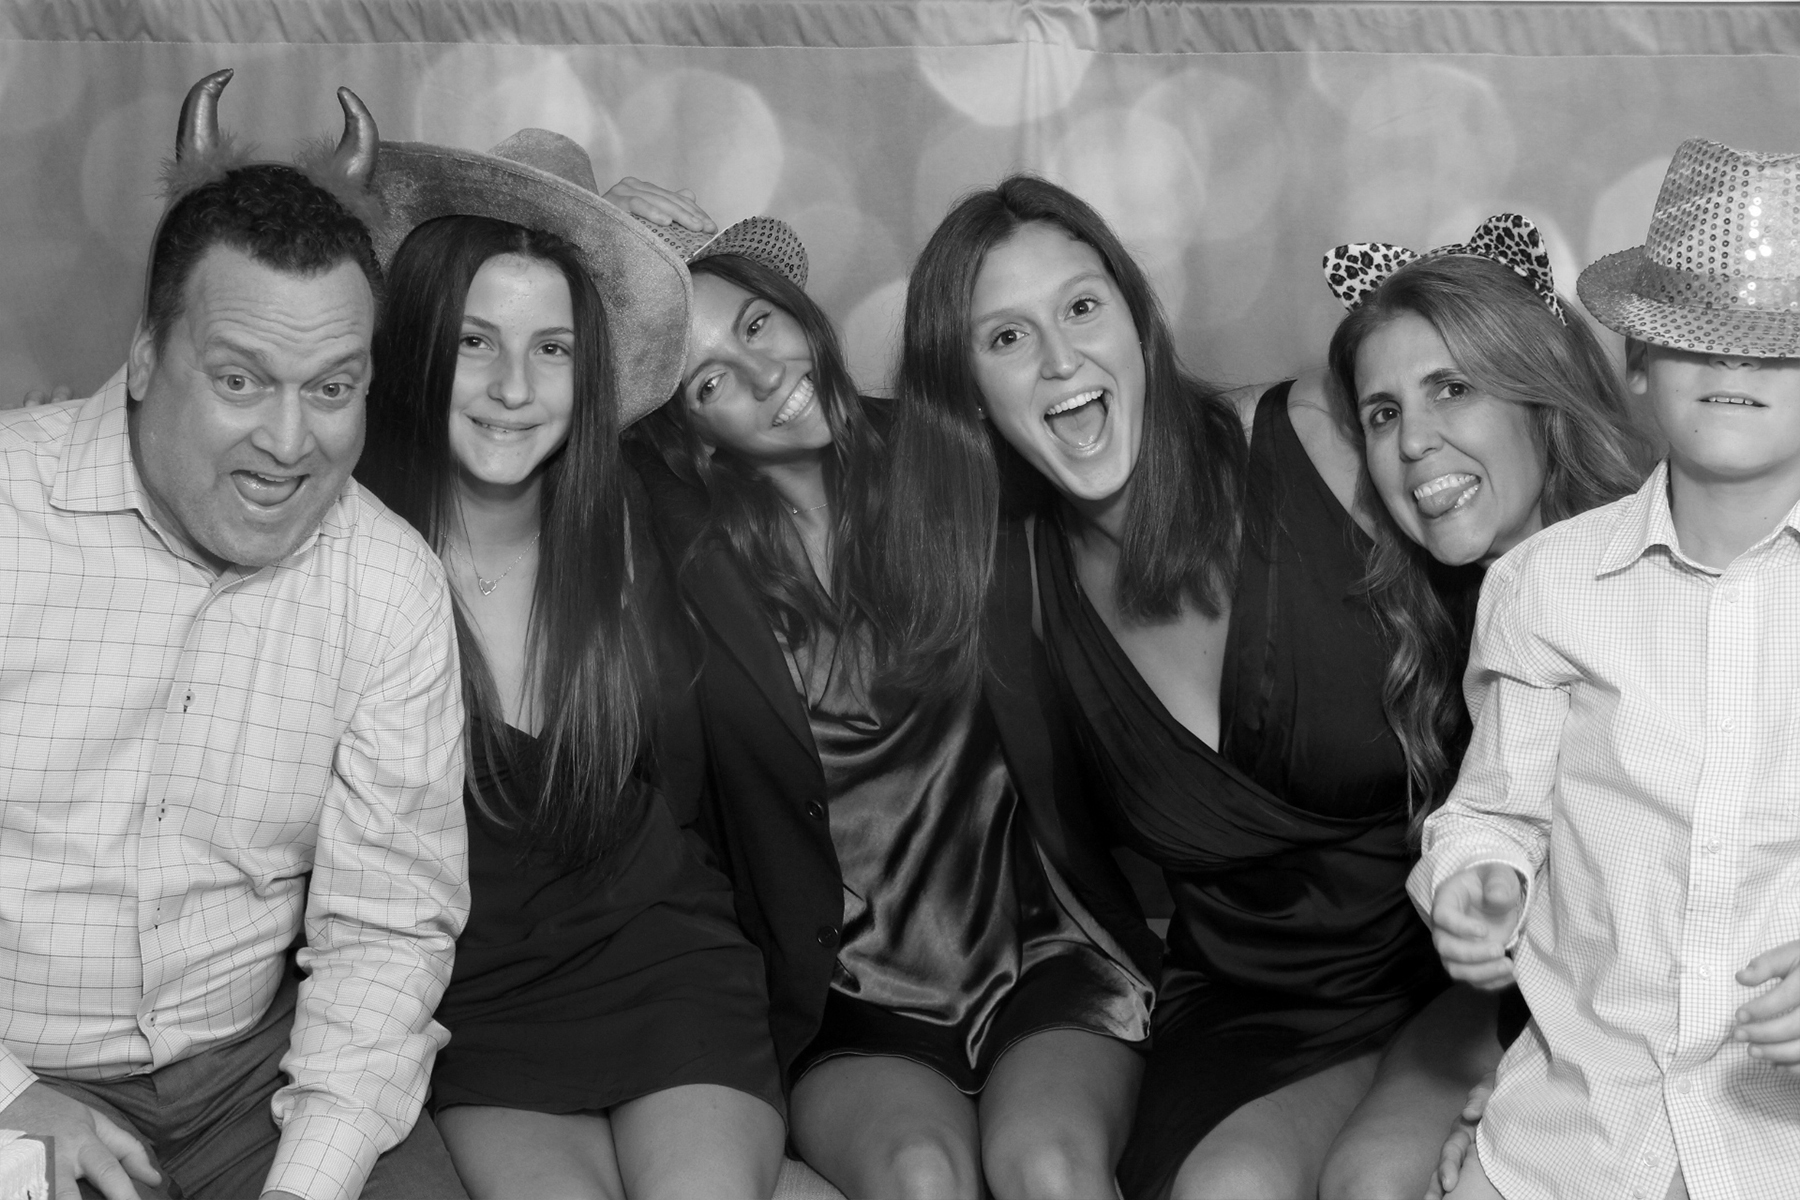  Emme Photo Booth - Grad Party 